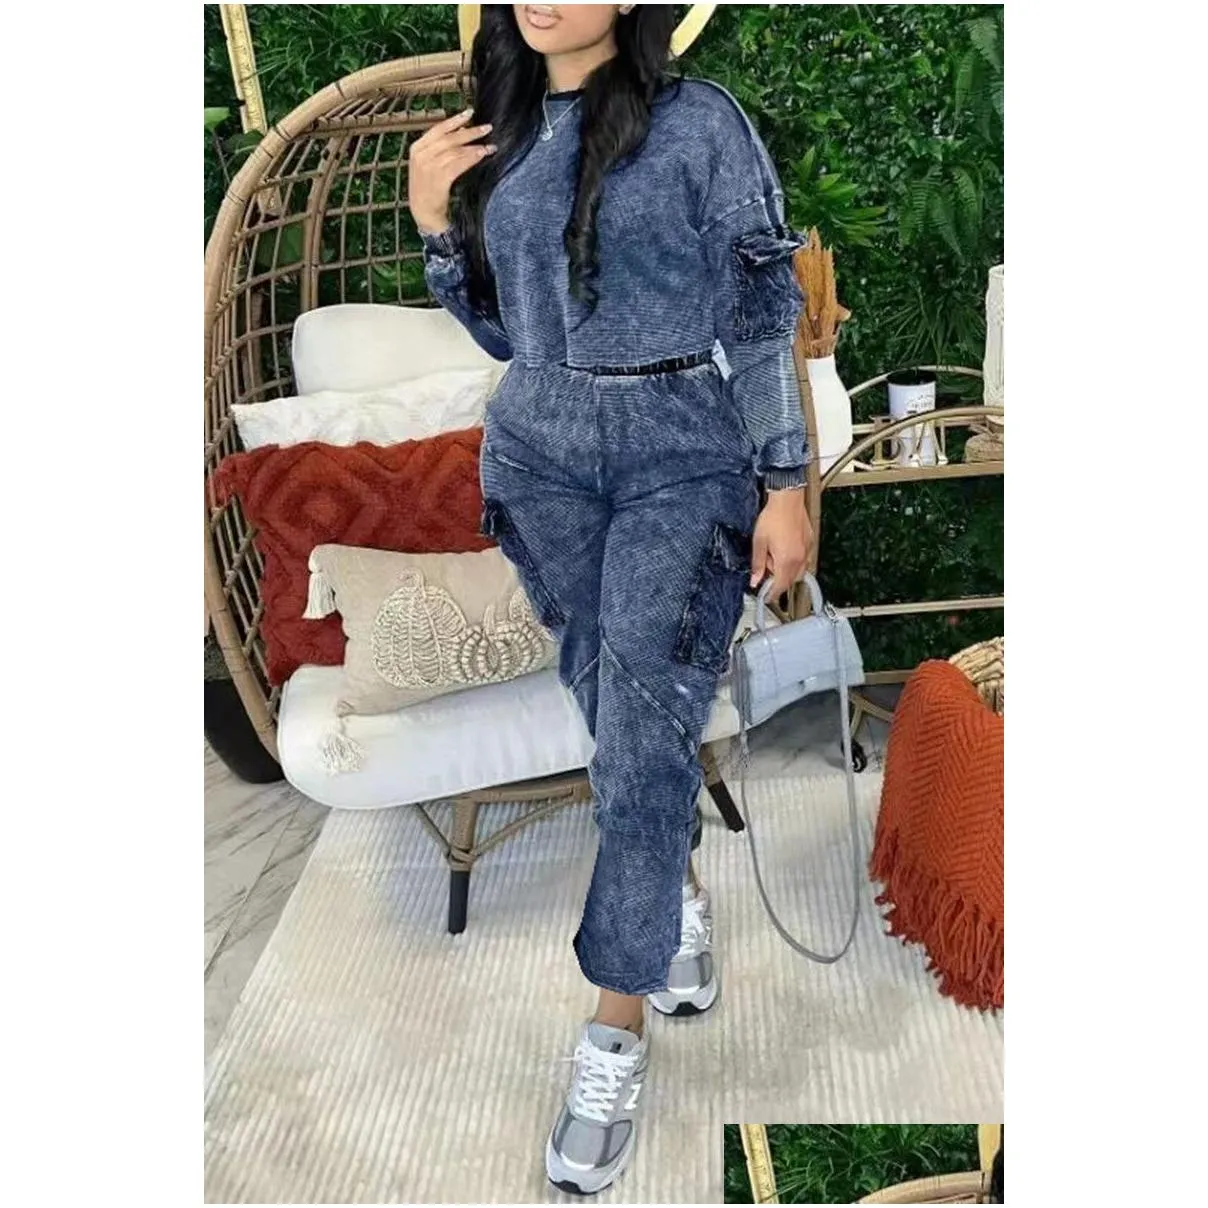 Newest Style Casual Pocket Pullover Long Sleeve Pants Suit Two Pieces Set Woman Round Collar T Shirt and Straight Trousers Suit